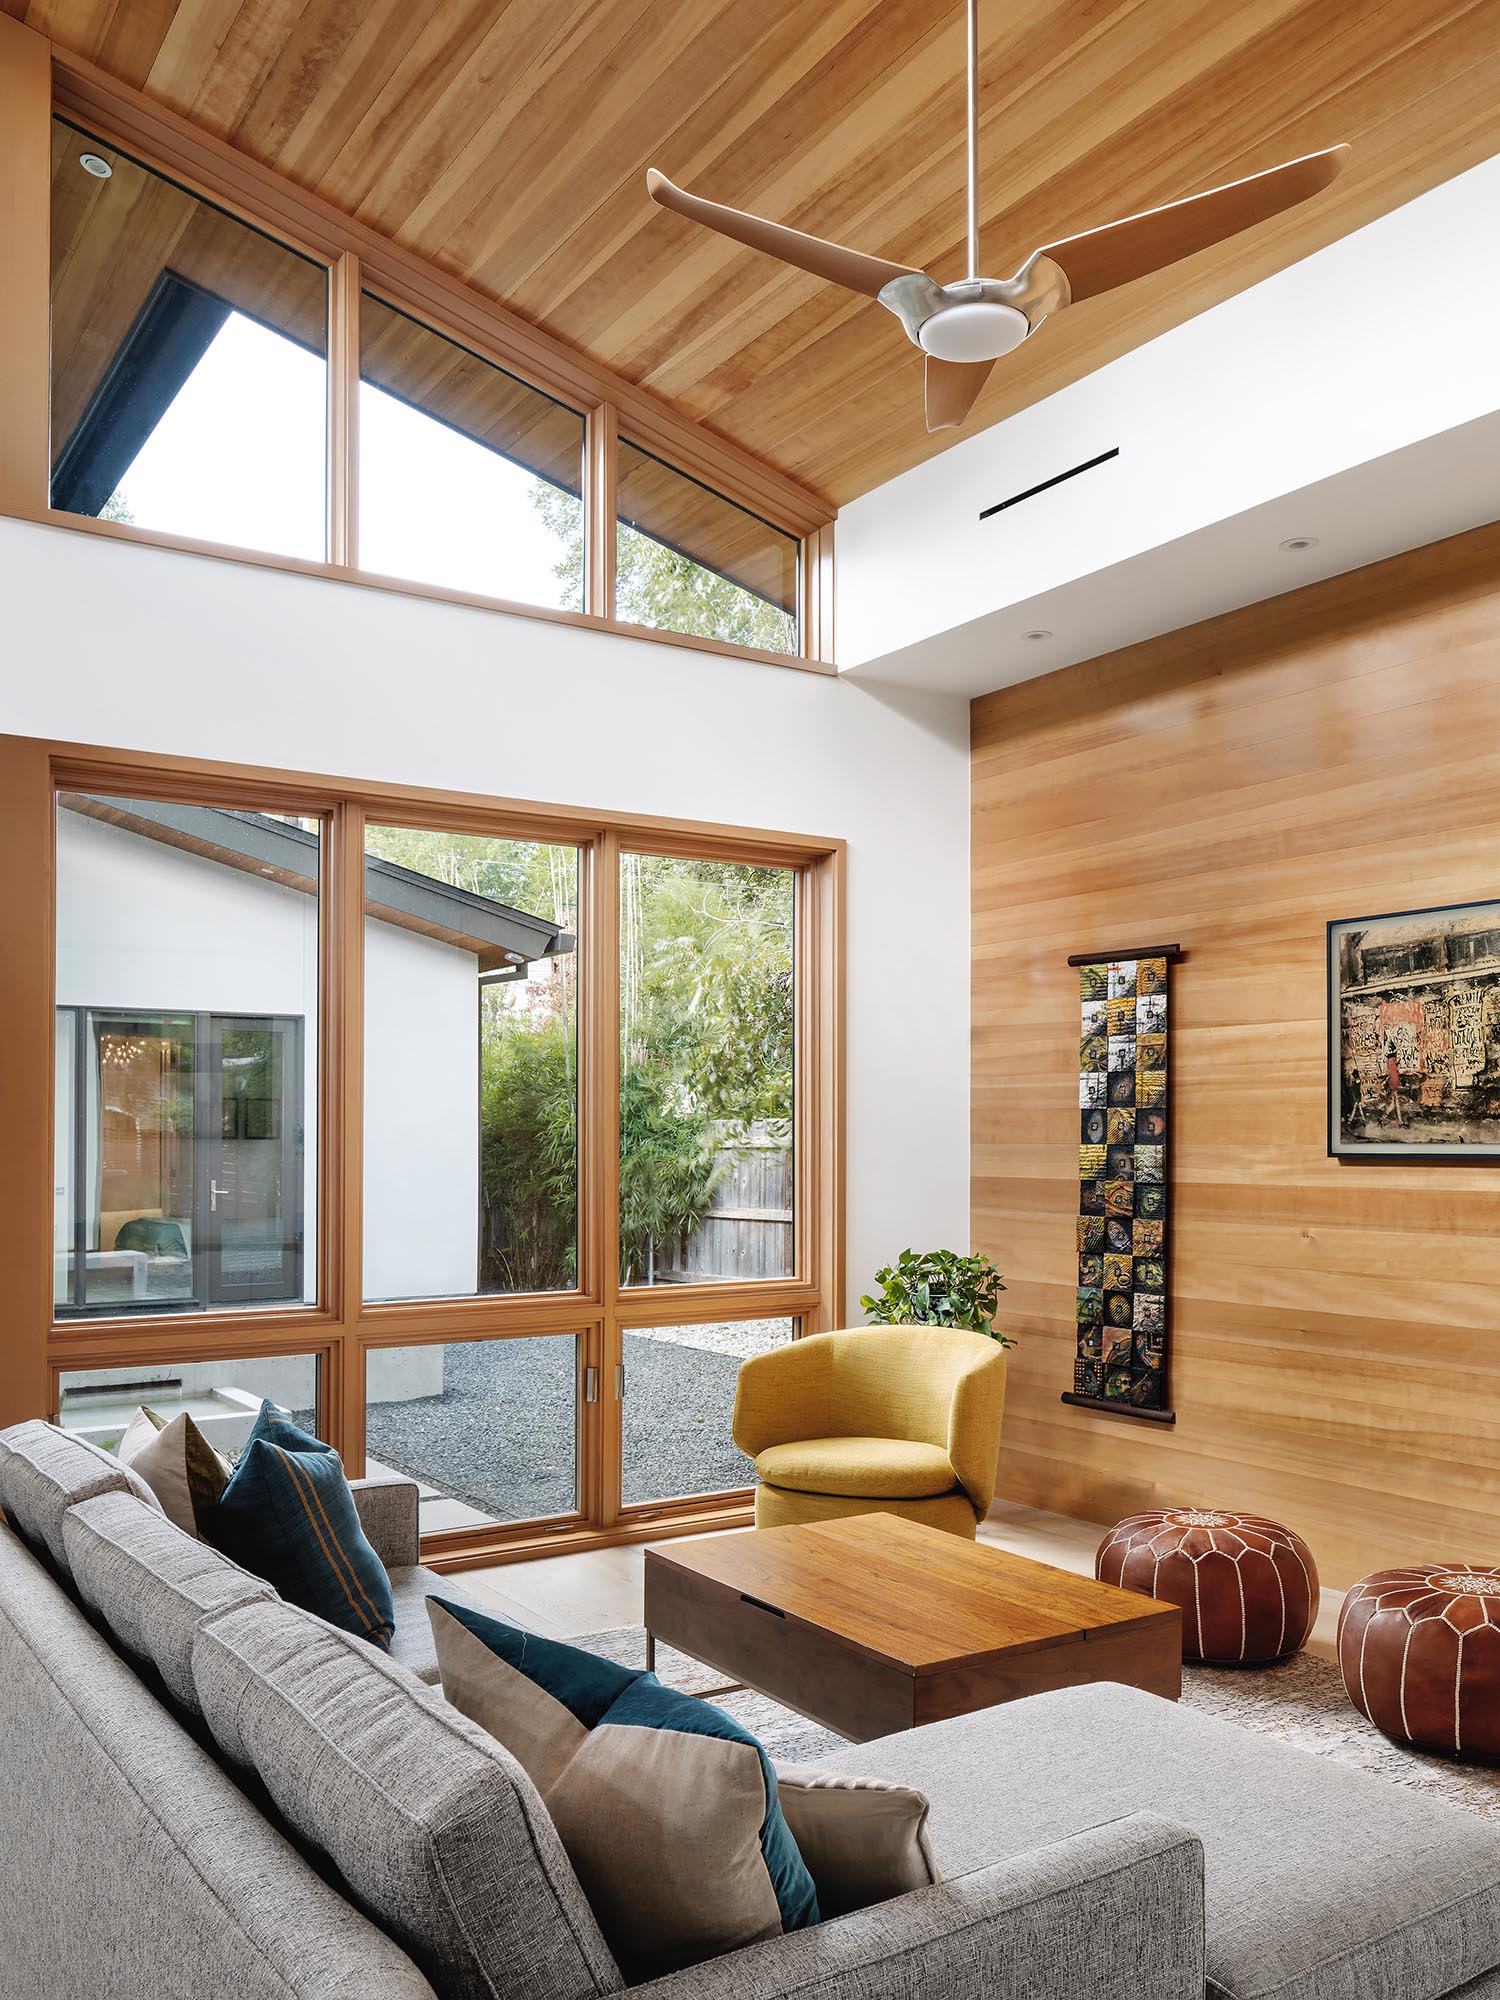 In this modern living room, a high sloped ceiling creates a lofty and open environment, while the wood adds a sense of warmth to the space.